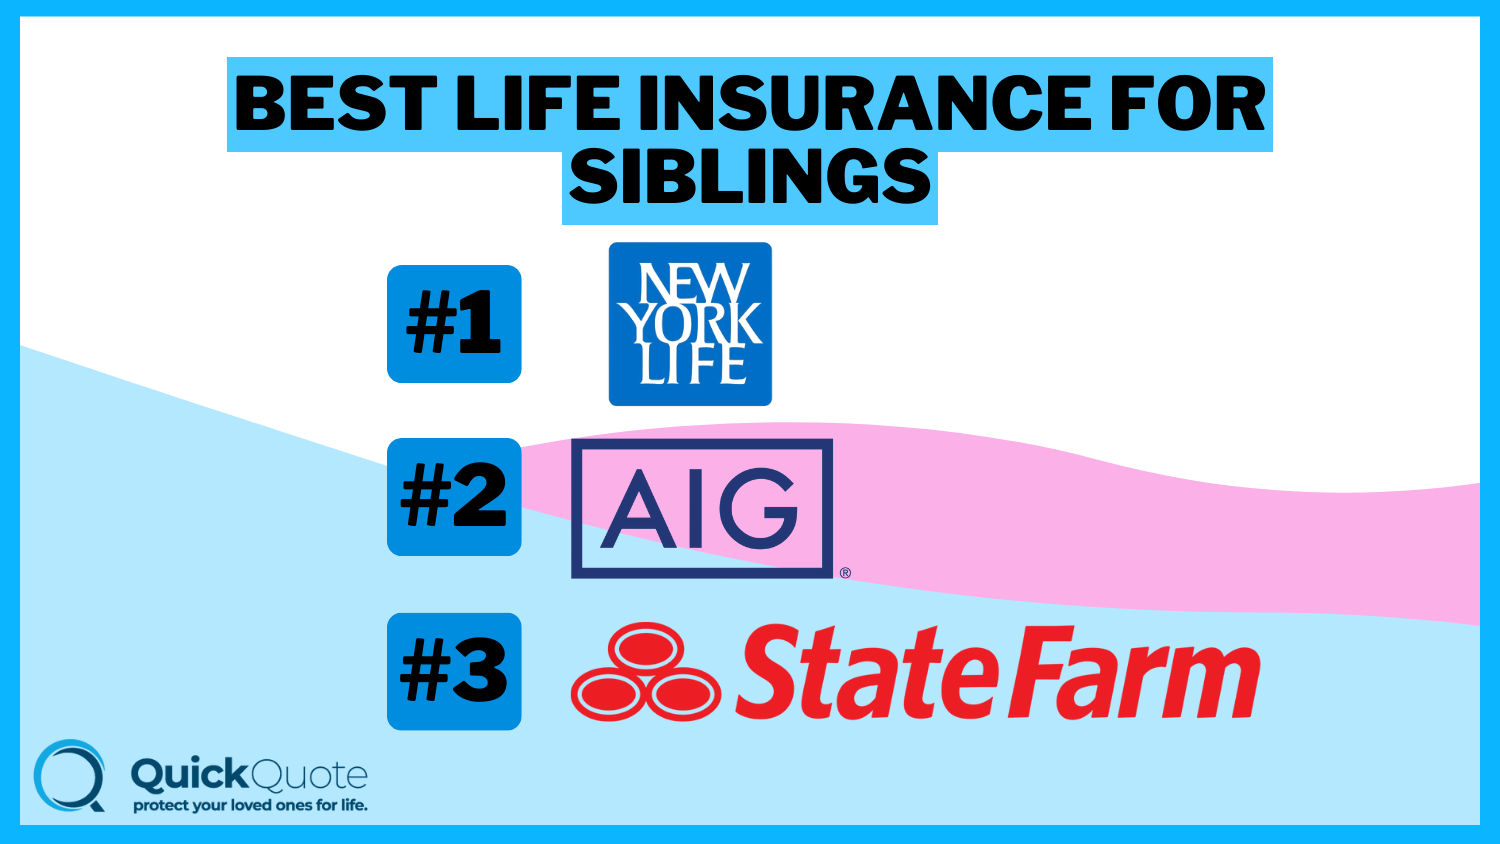 New York Life, AIG, and State Farm: Best Life Insurance for Siblings